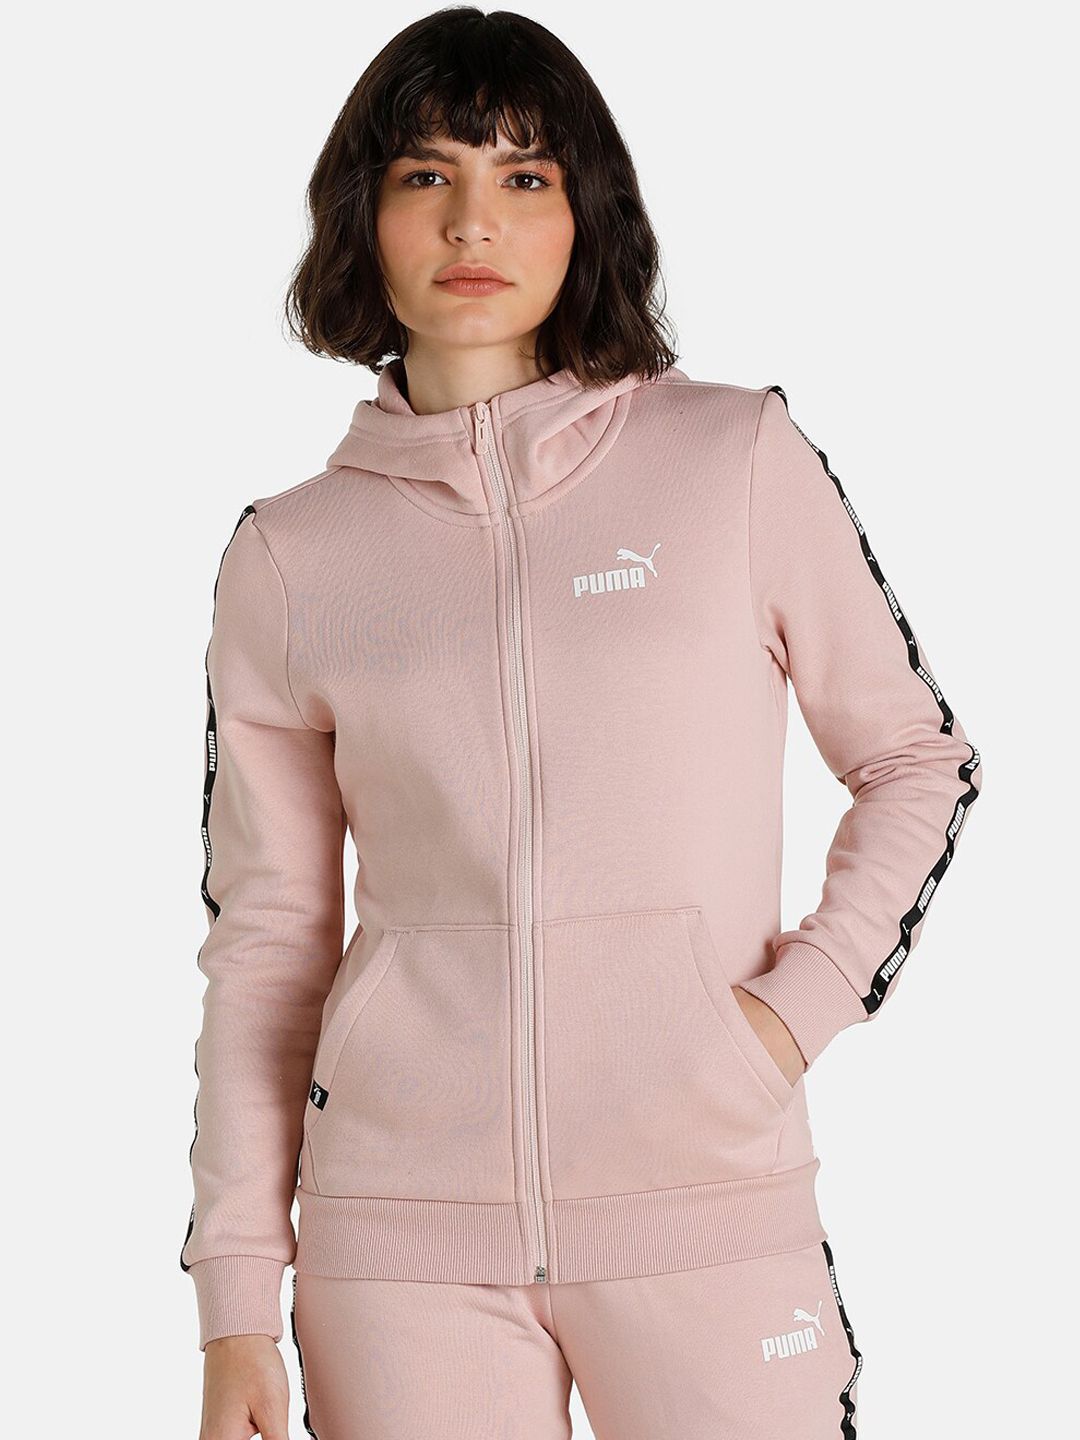 Puma Women Pink Solid Hooded Jackets Price in India